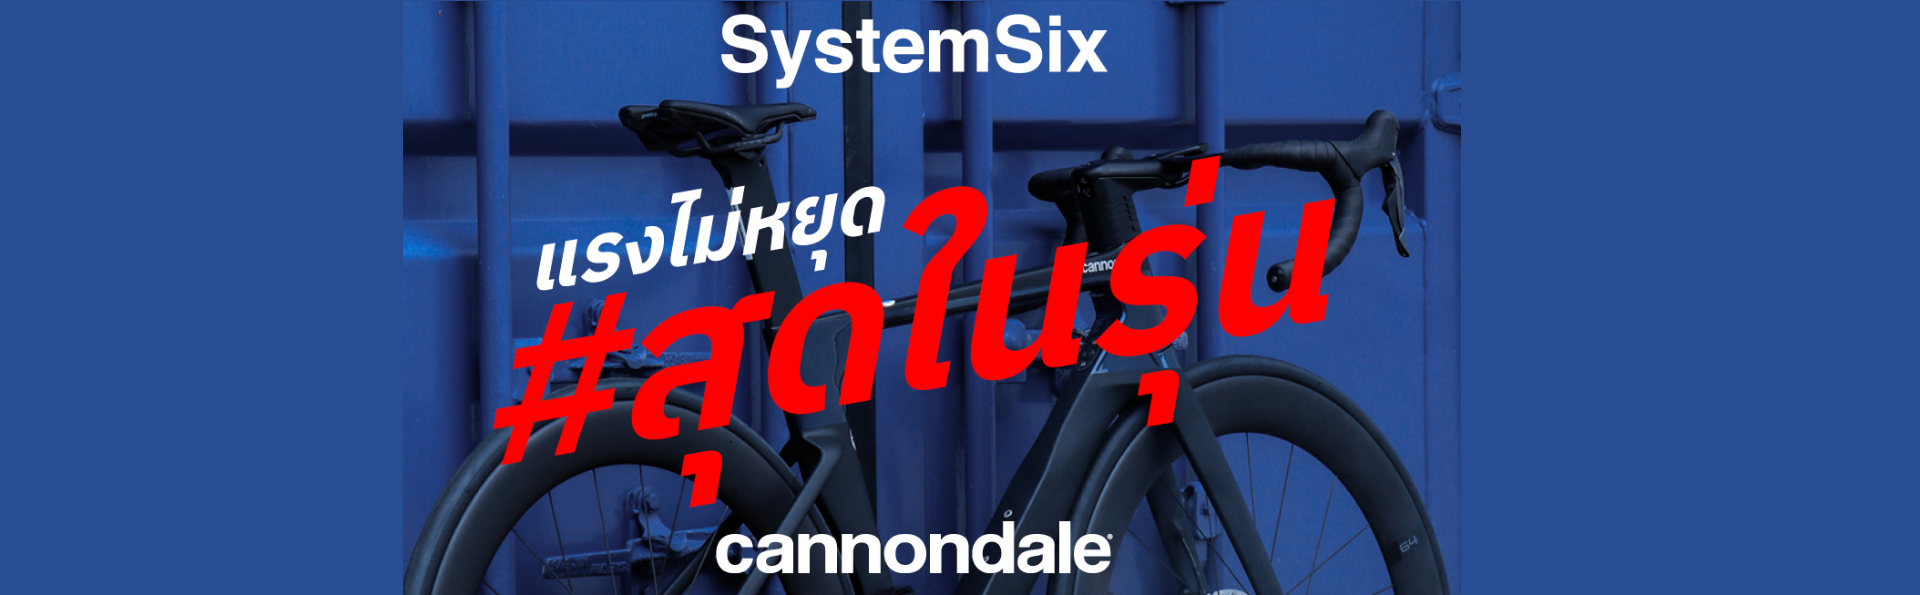 systemsix